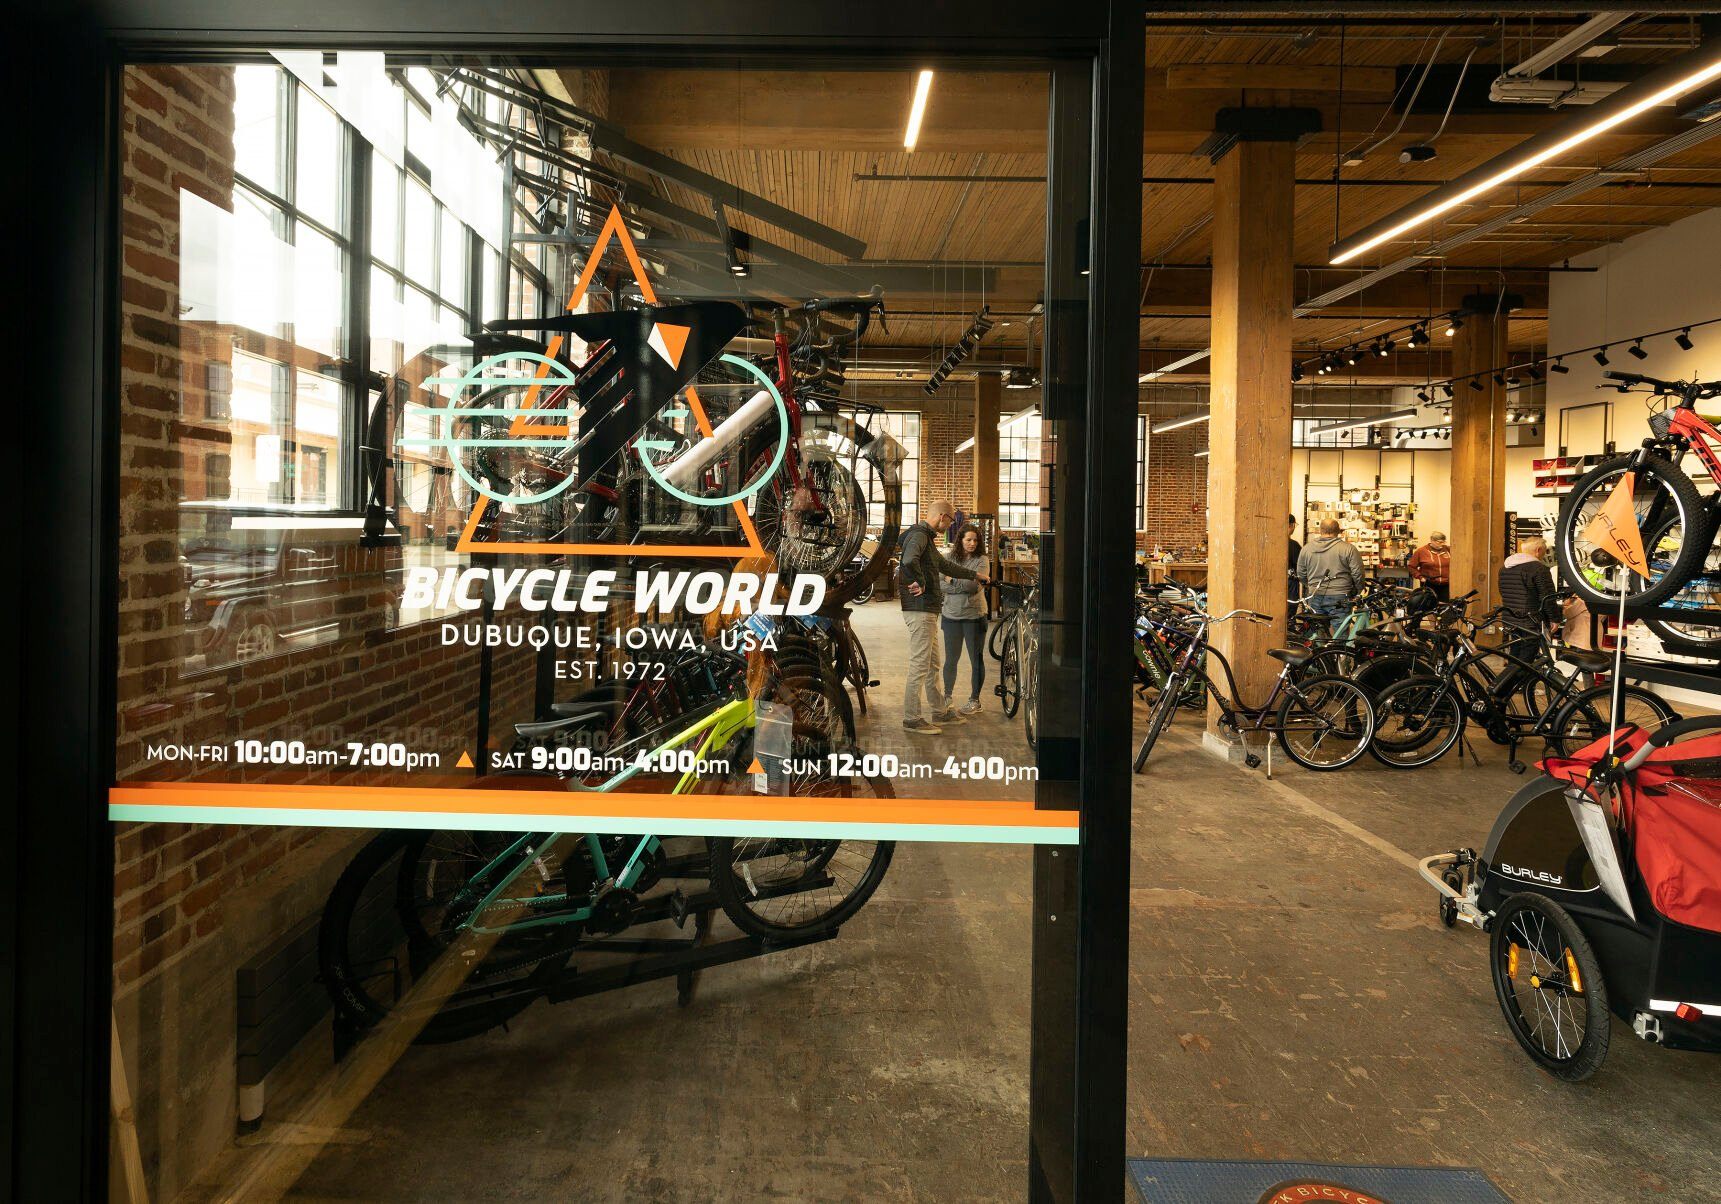 Entrance to Bicycle World